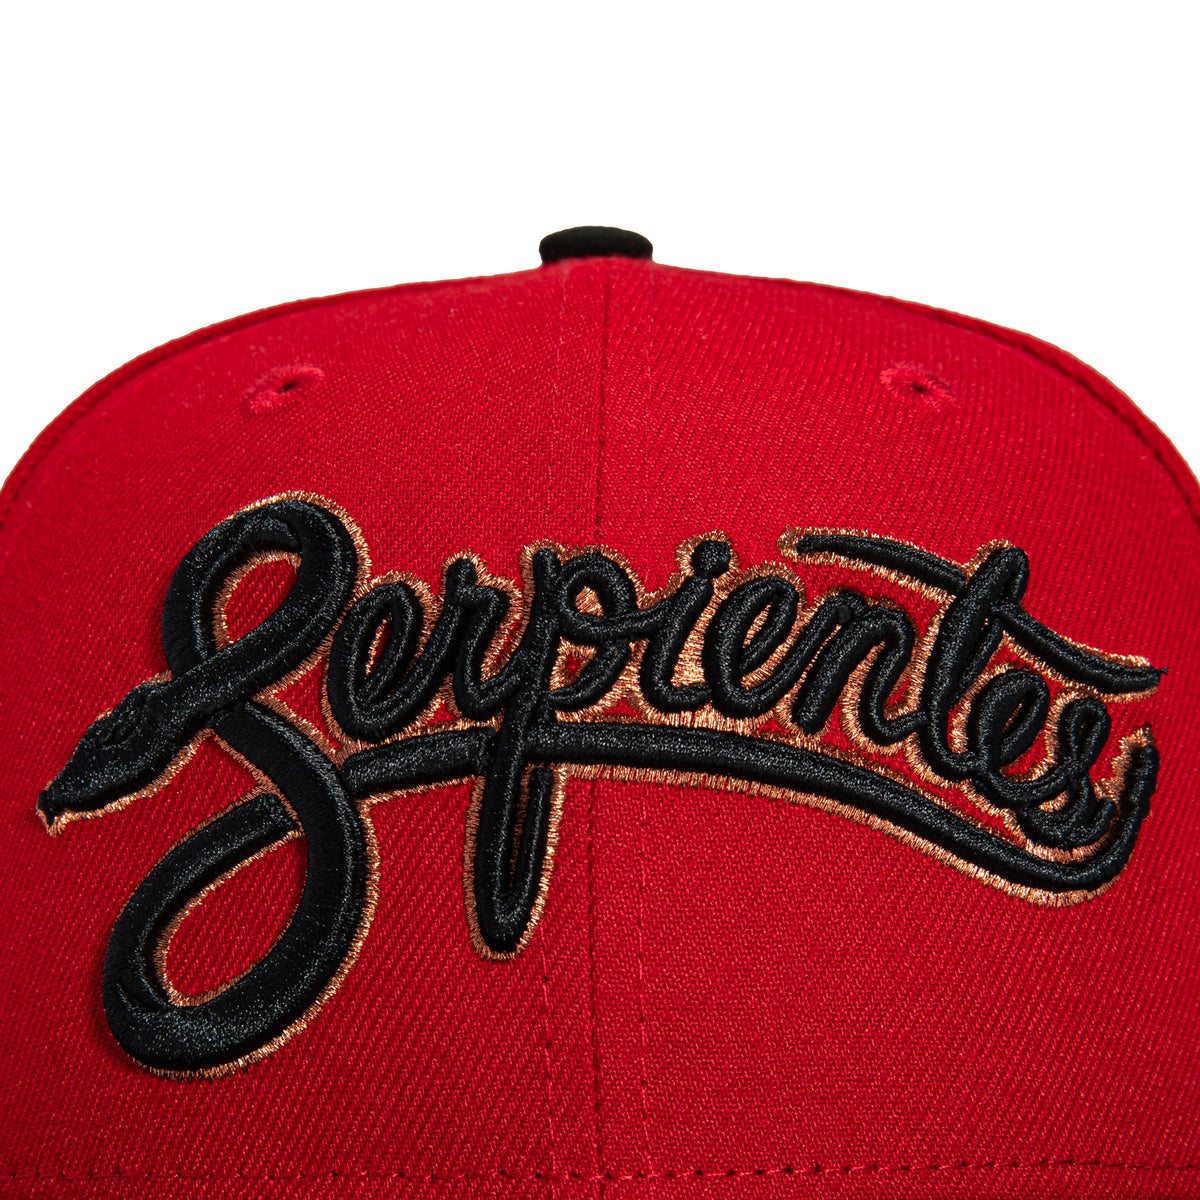 Get Your Hands on the best New Era 59Fifty Arizona Diamondbacks Serpientes  Word Logo Patch Hat - Red, Black, Metallic Copper New Era available at  unbeatable Prices